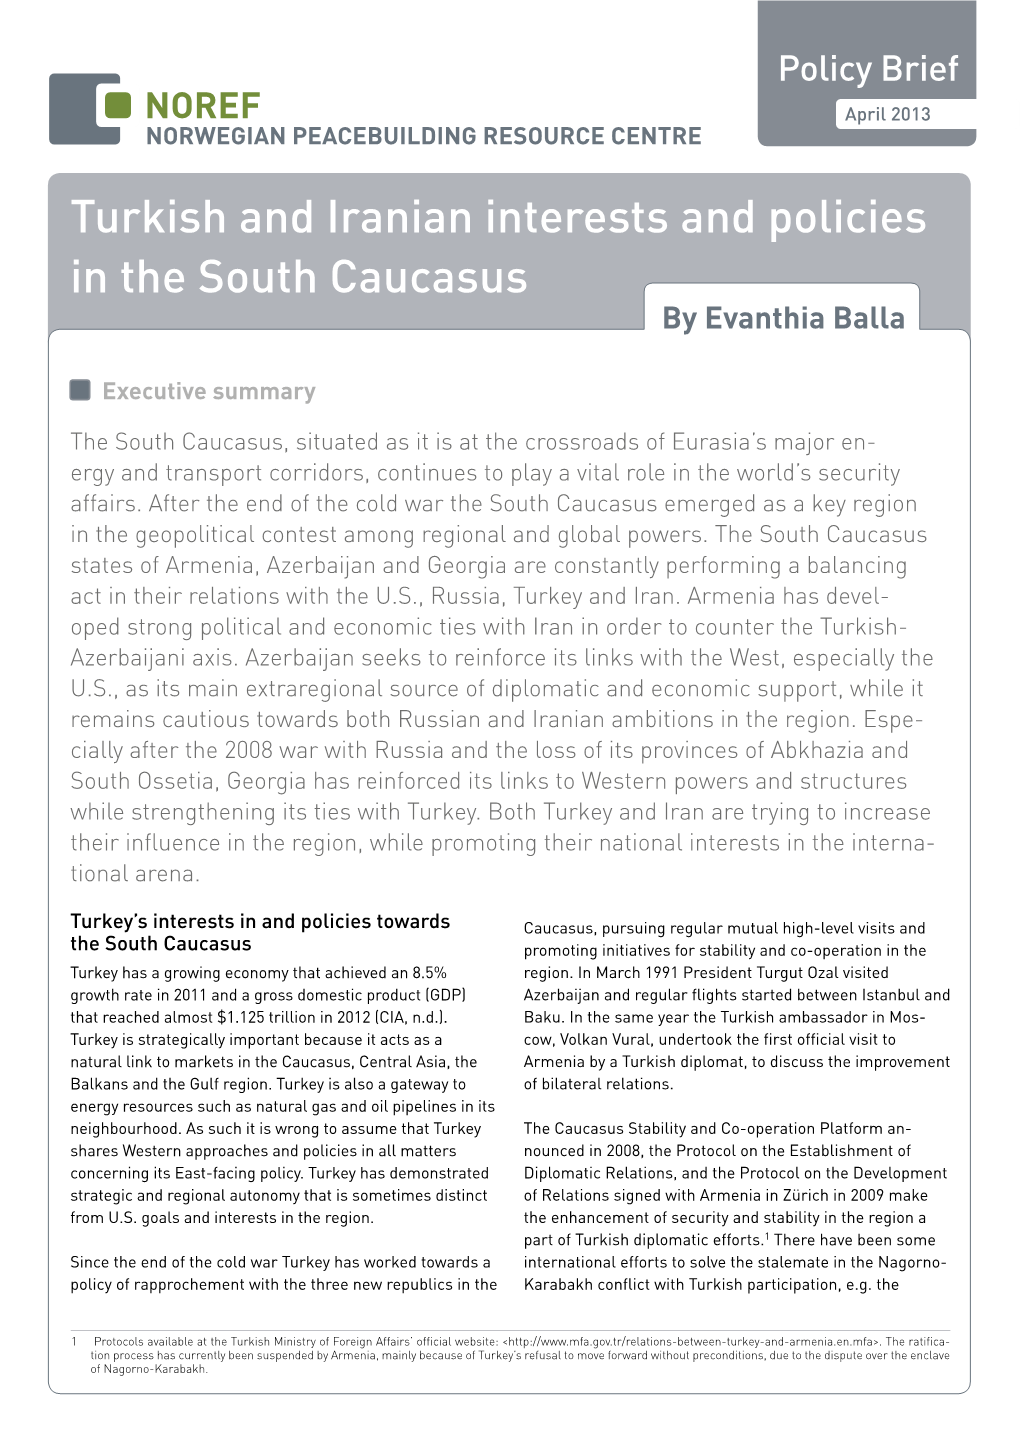 Turkish and Iranian Interests and Policies in the South Caucasus by Evanthia Balla